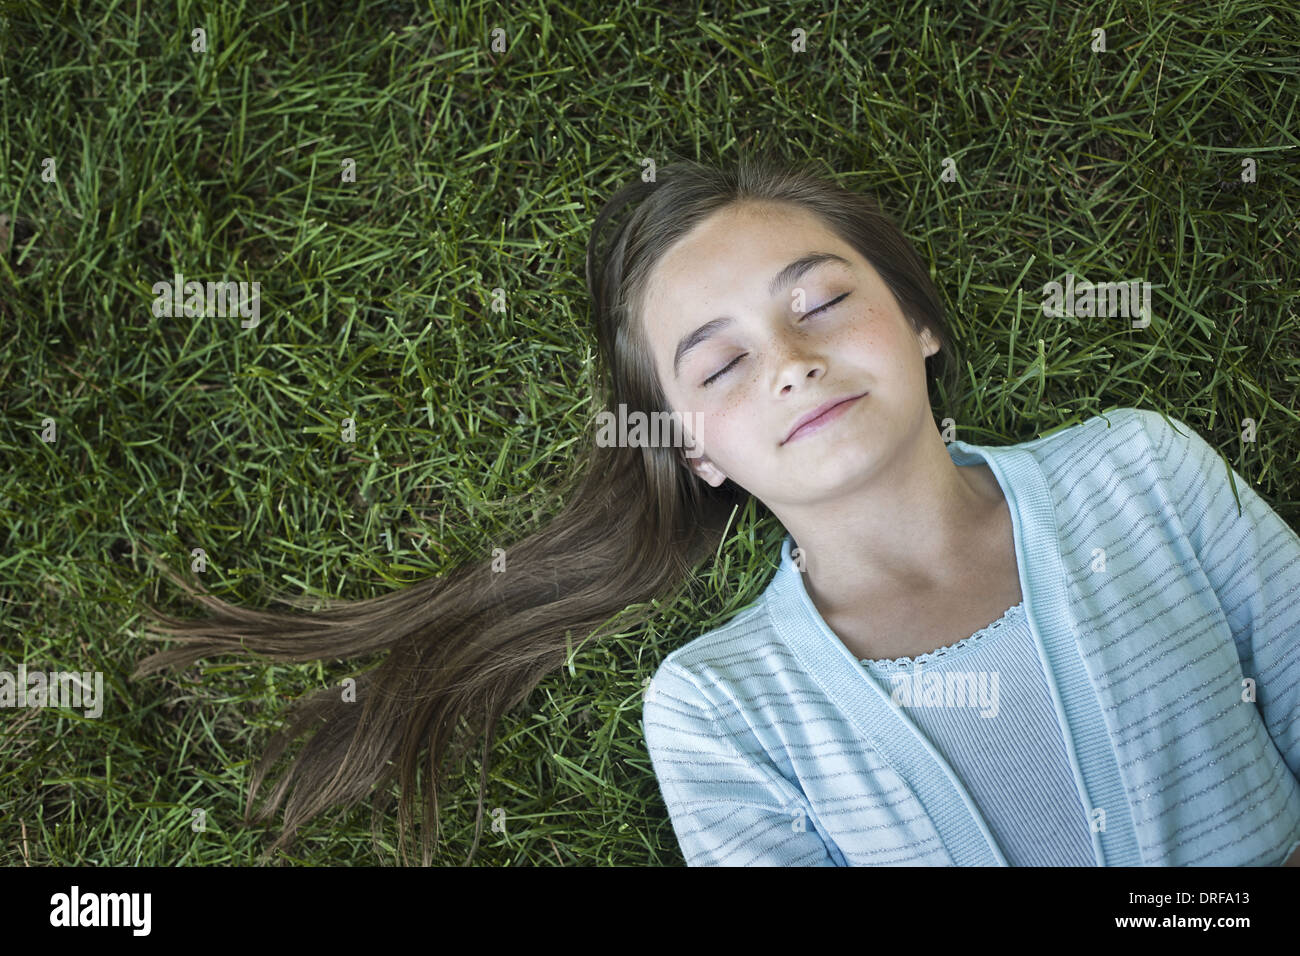 Utah USA girl with long hair fanned out asleep grass Stock Photo